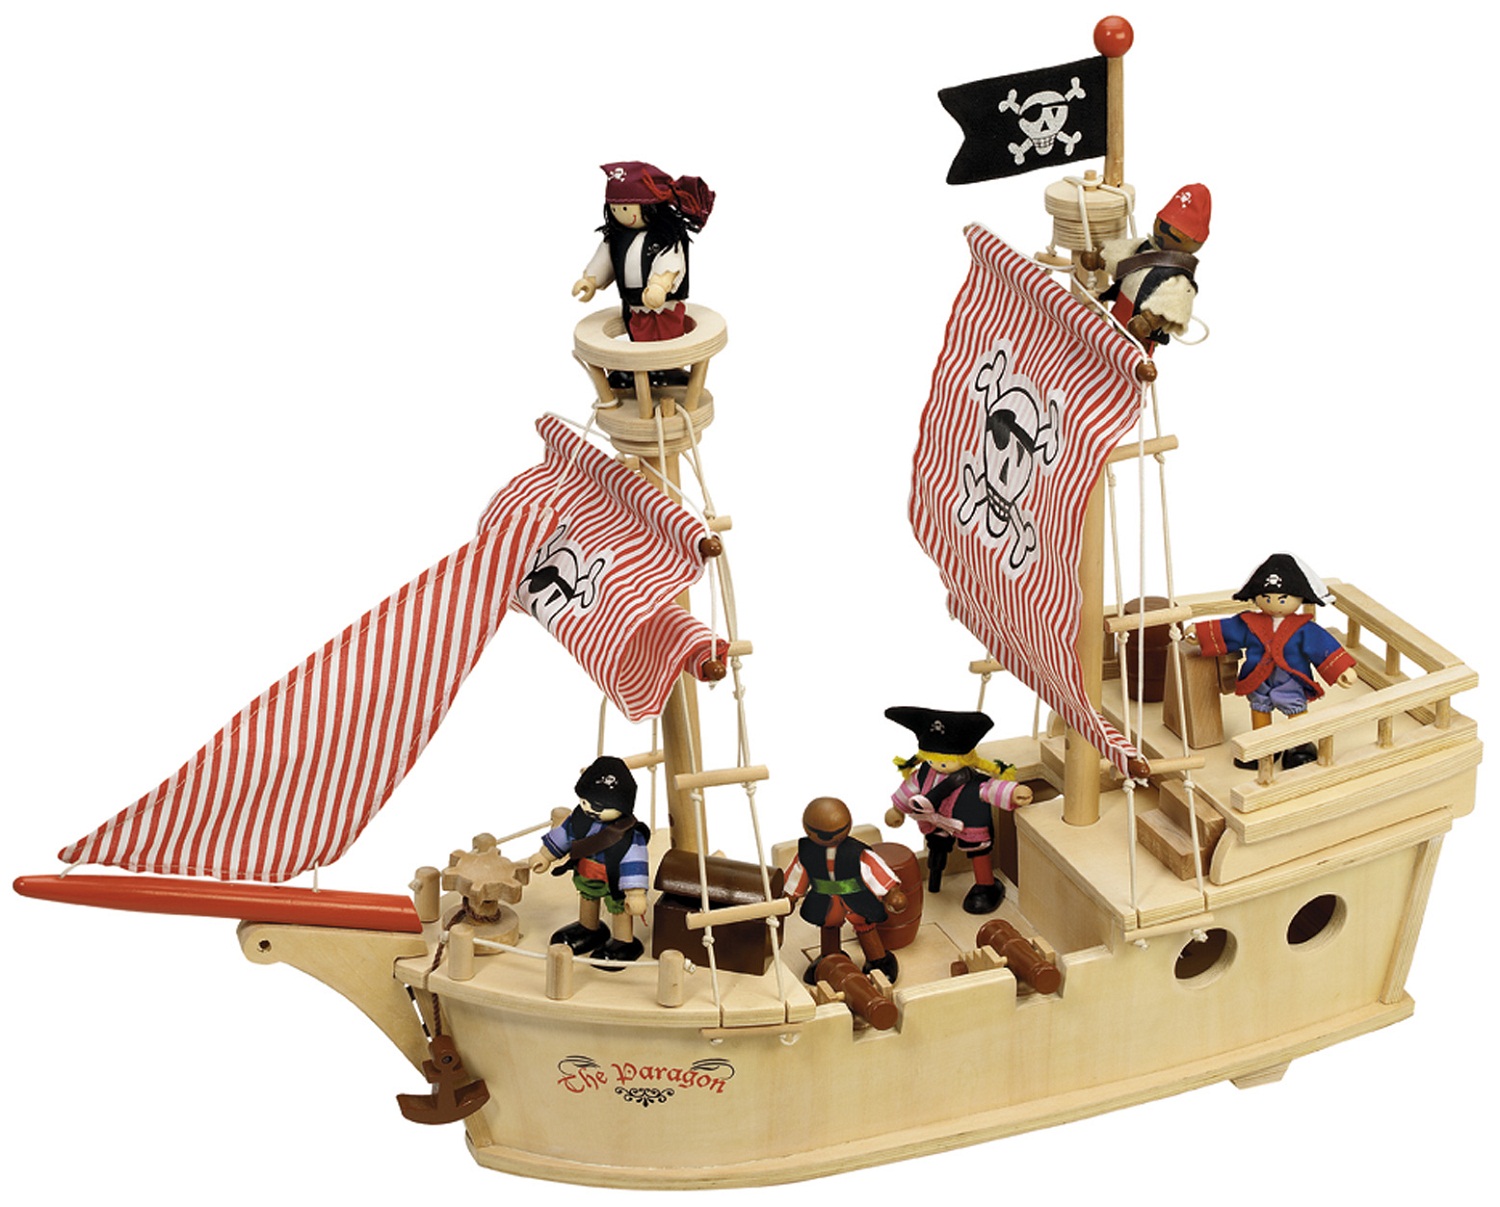 Pirate Ship Pictures For Kids